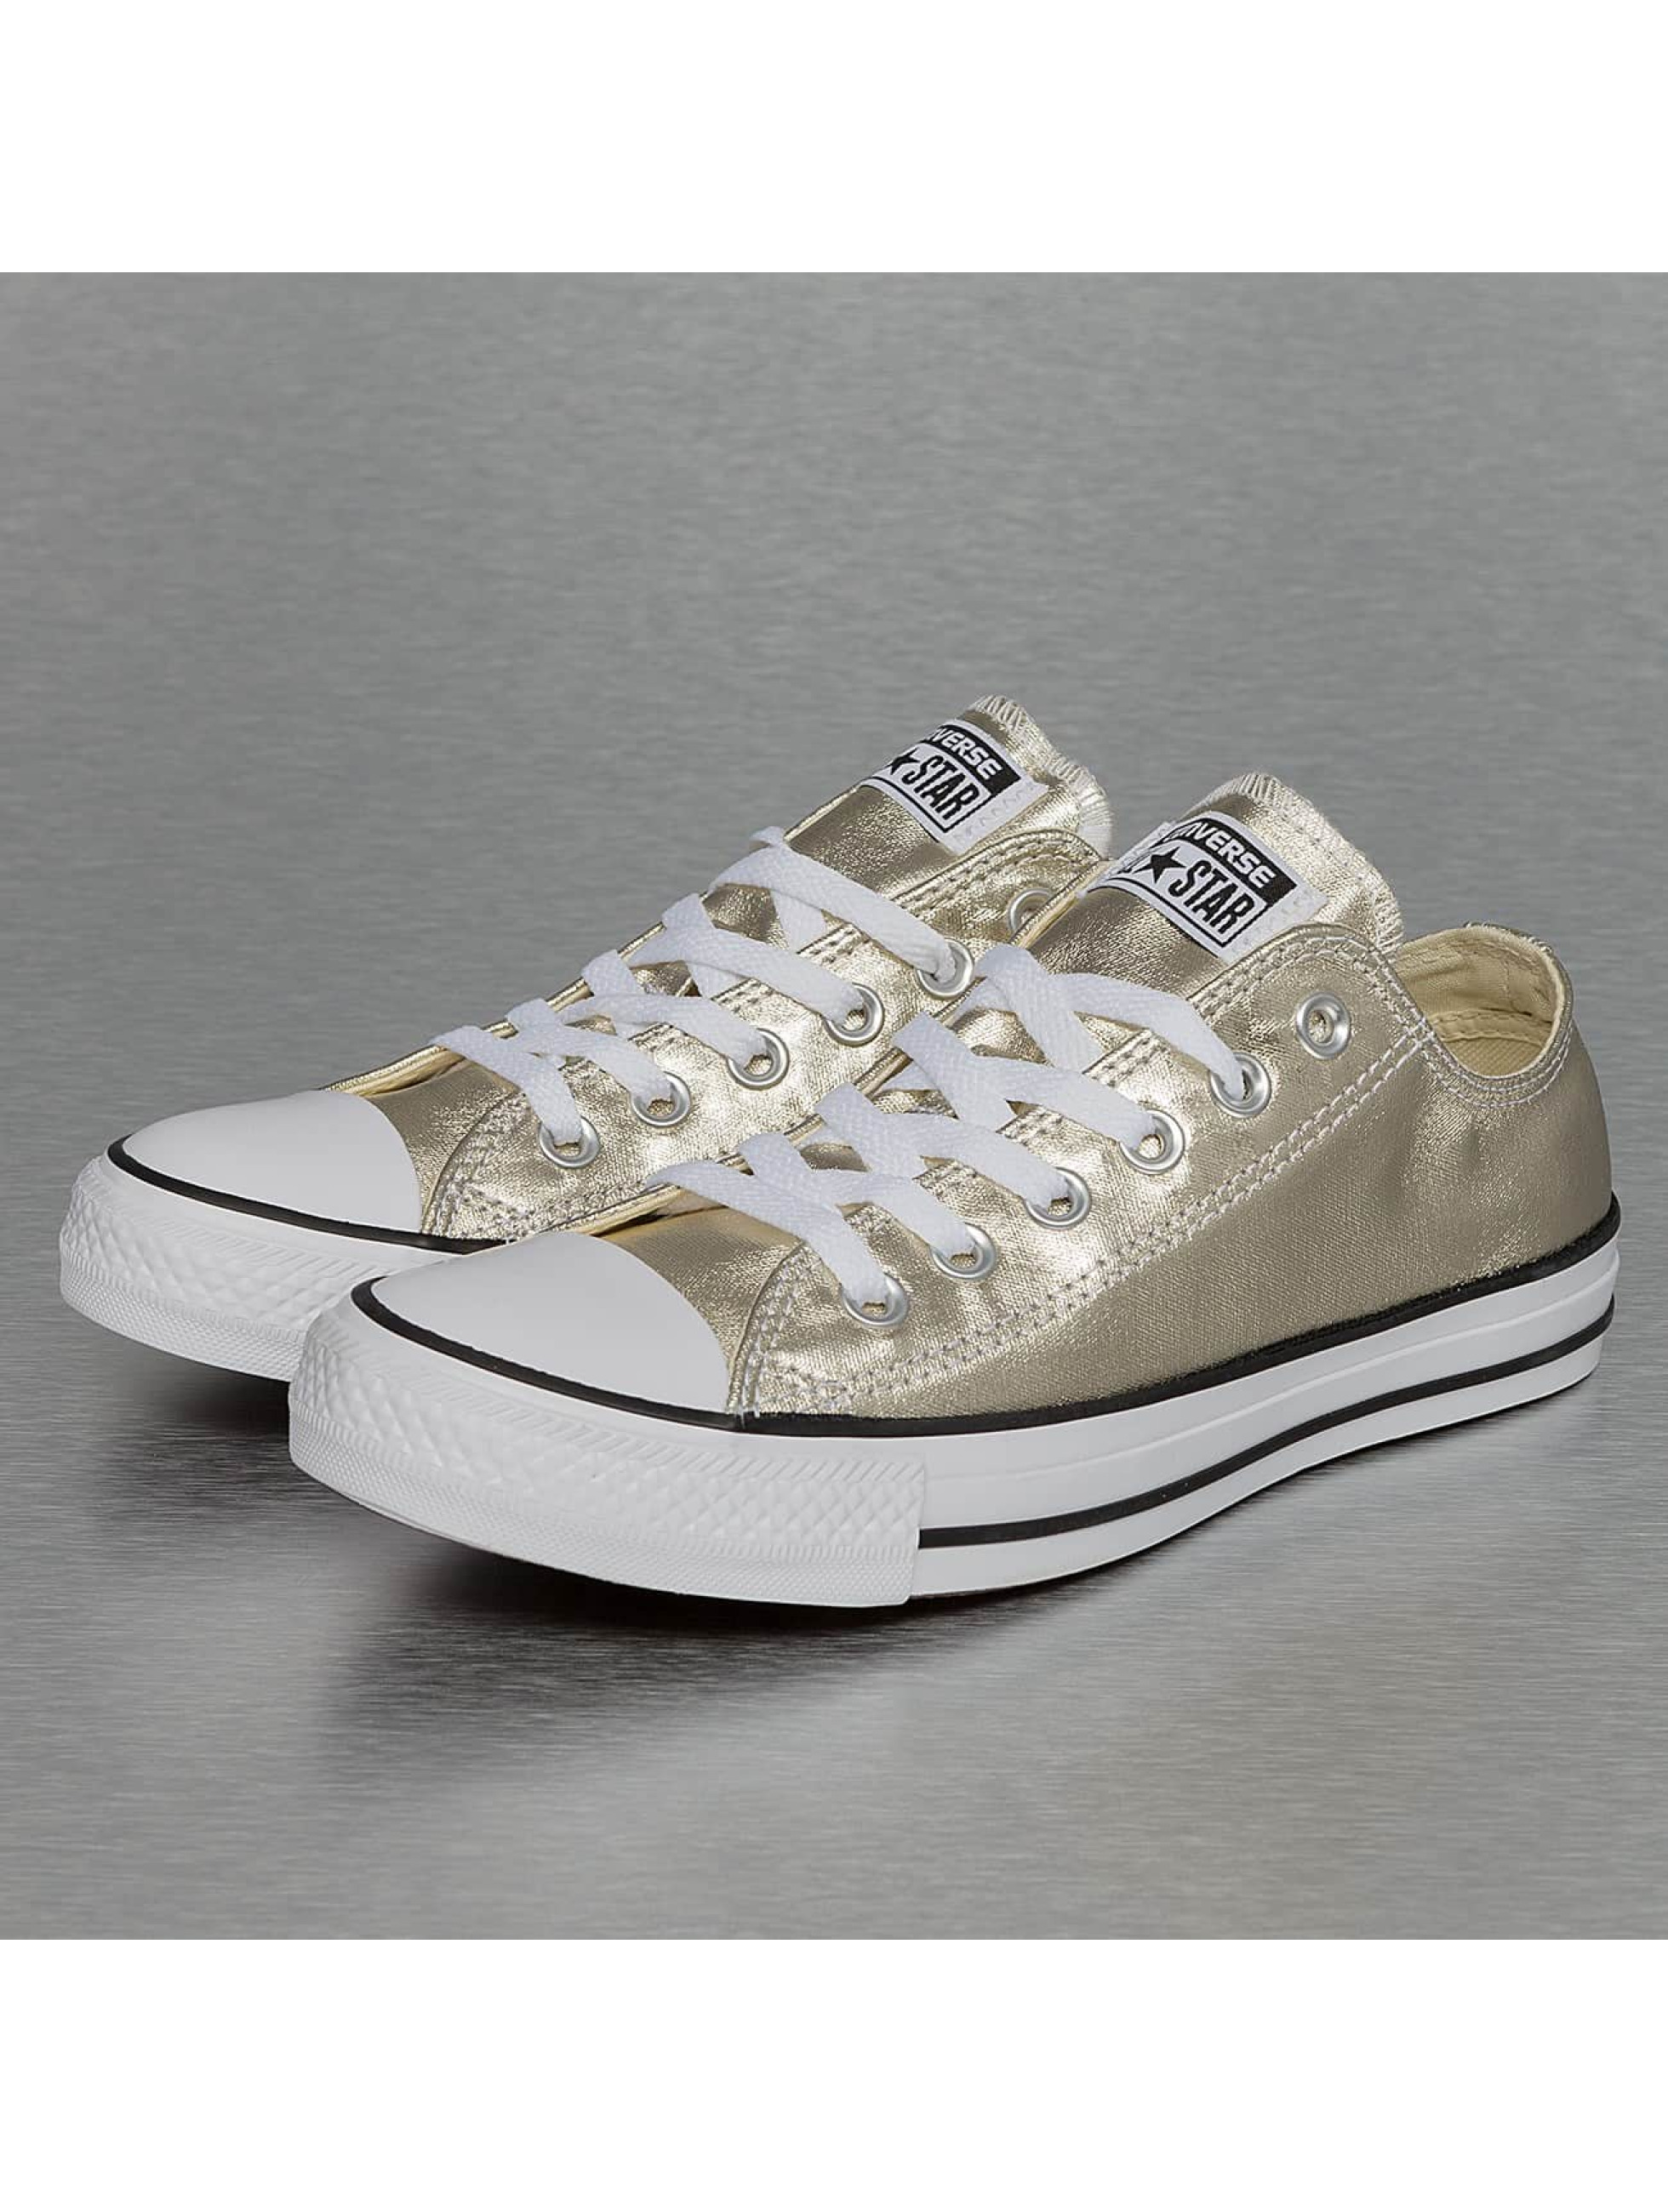 Converse Chaussures / Baskets Chuck Taylor All Star en or